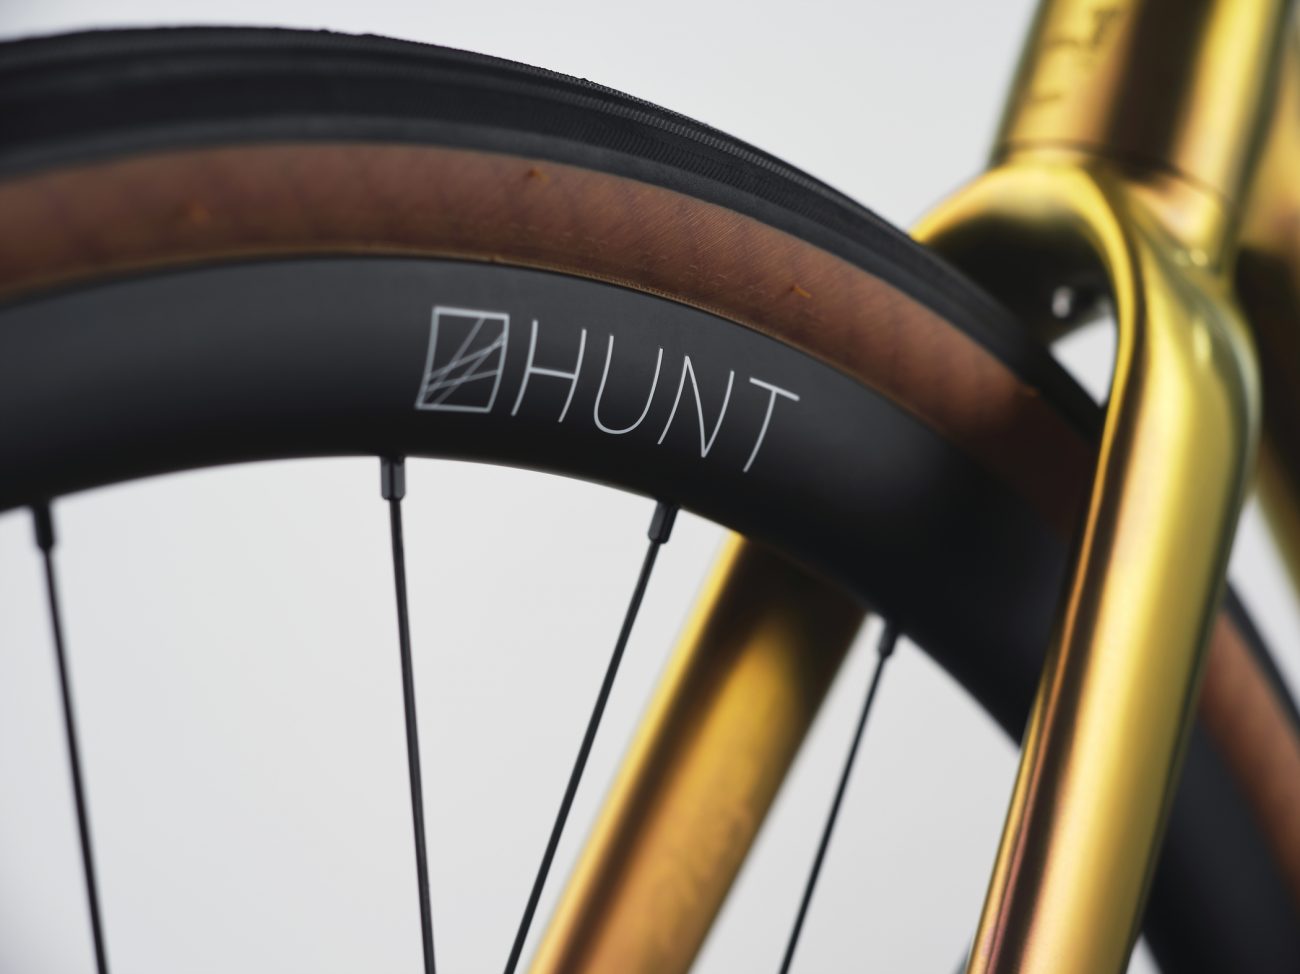 Detail of a Sturdy Cycles titanium bike with Hunt wheels